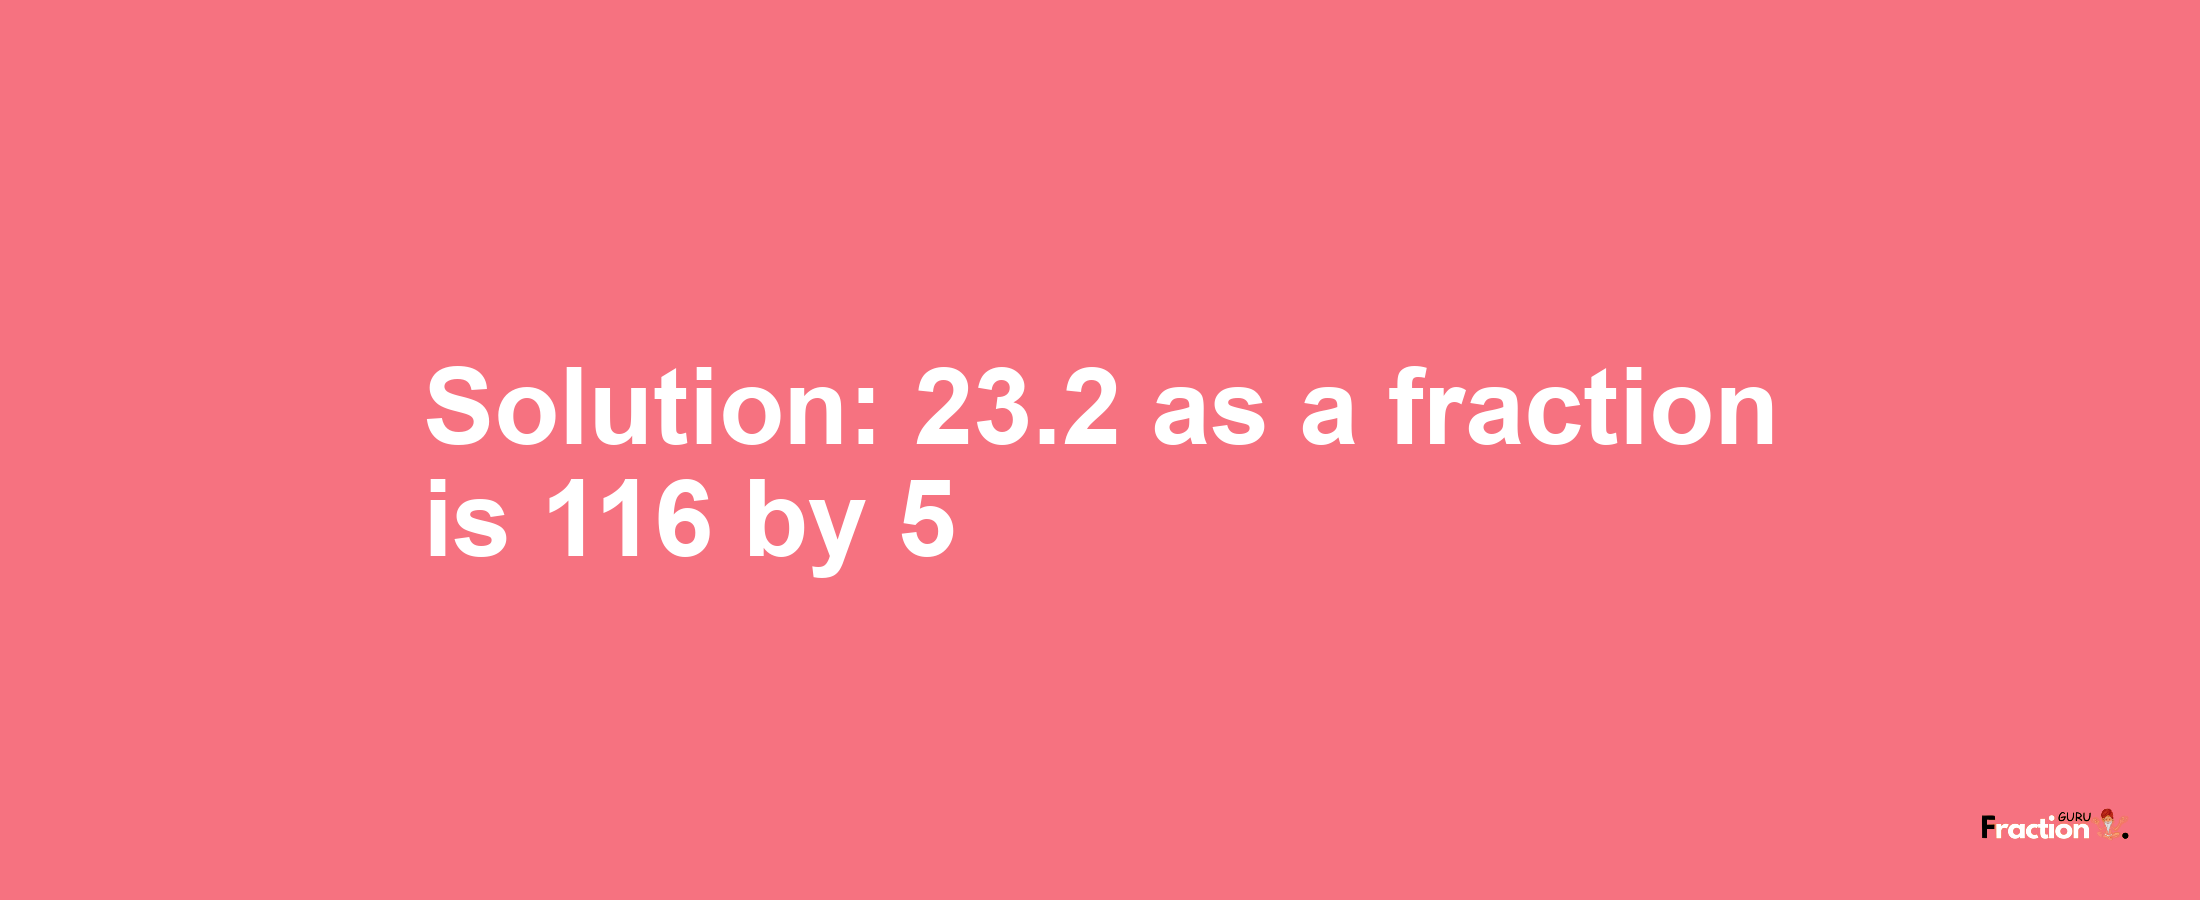 Solution:23.2 as a fraction is 116/5